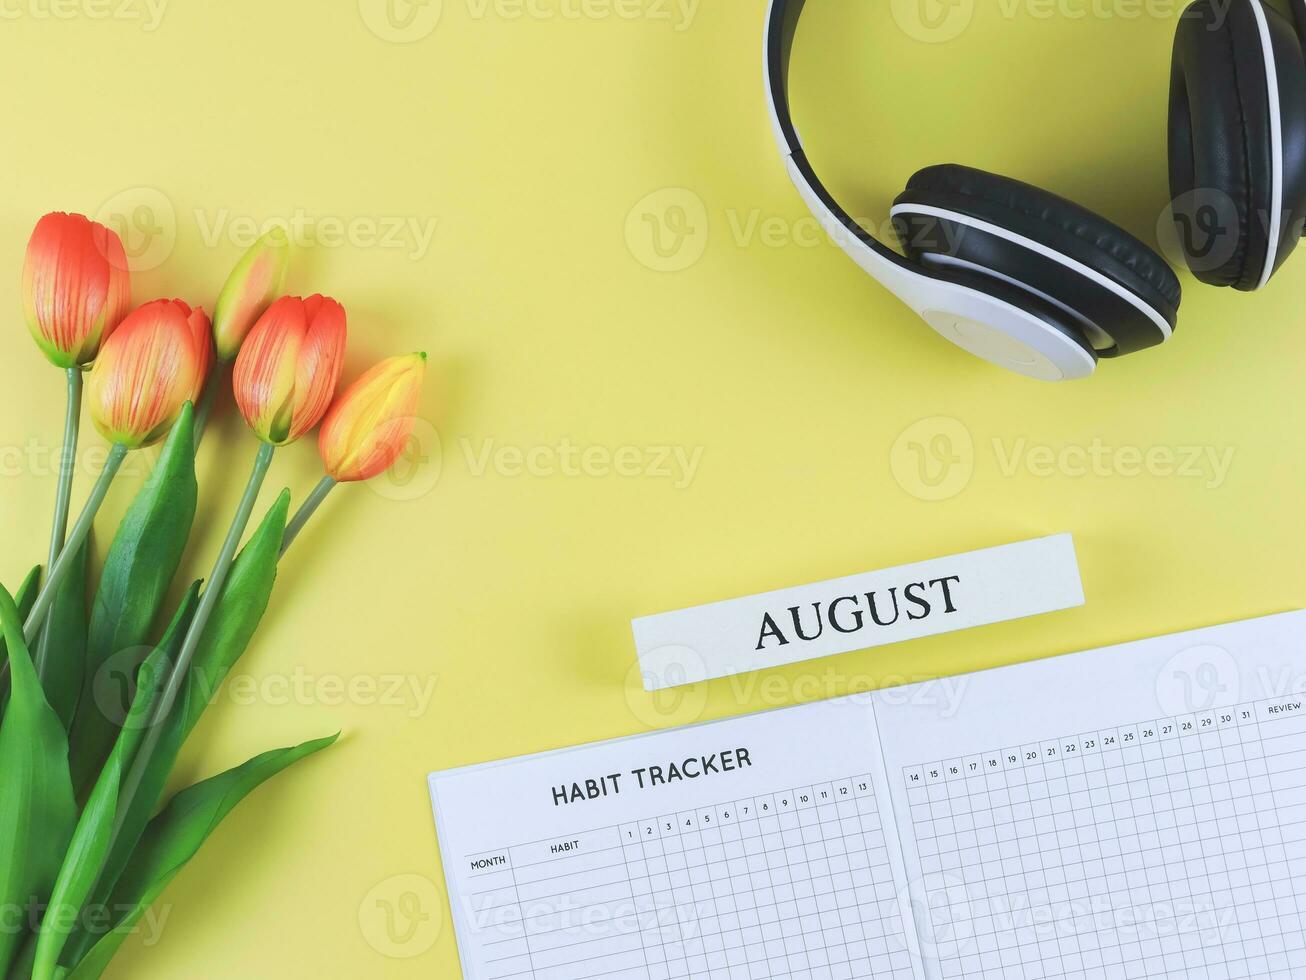 flat lay of habit tracker book with wooden calendar August,  headphones and tulips  on yellow background. photo